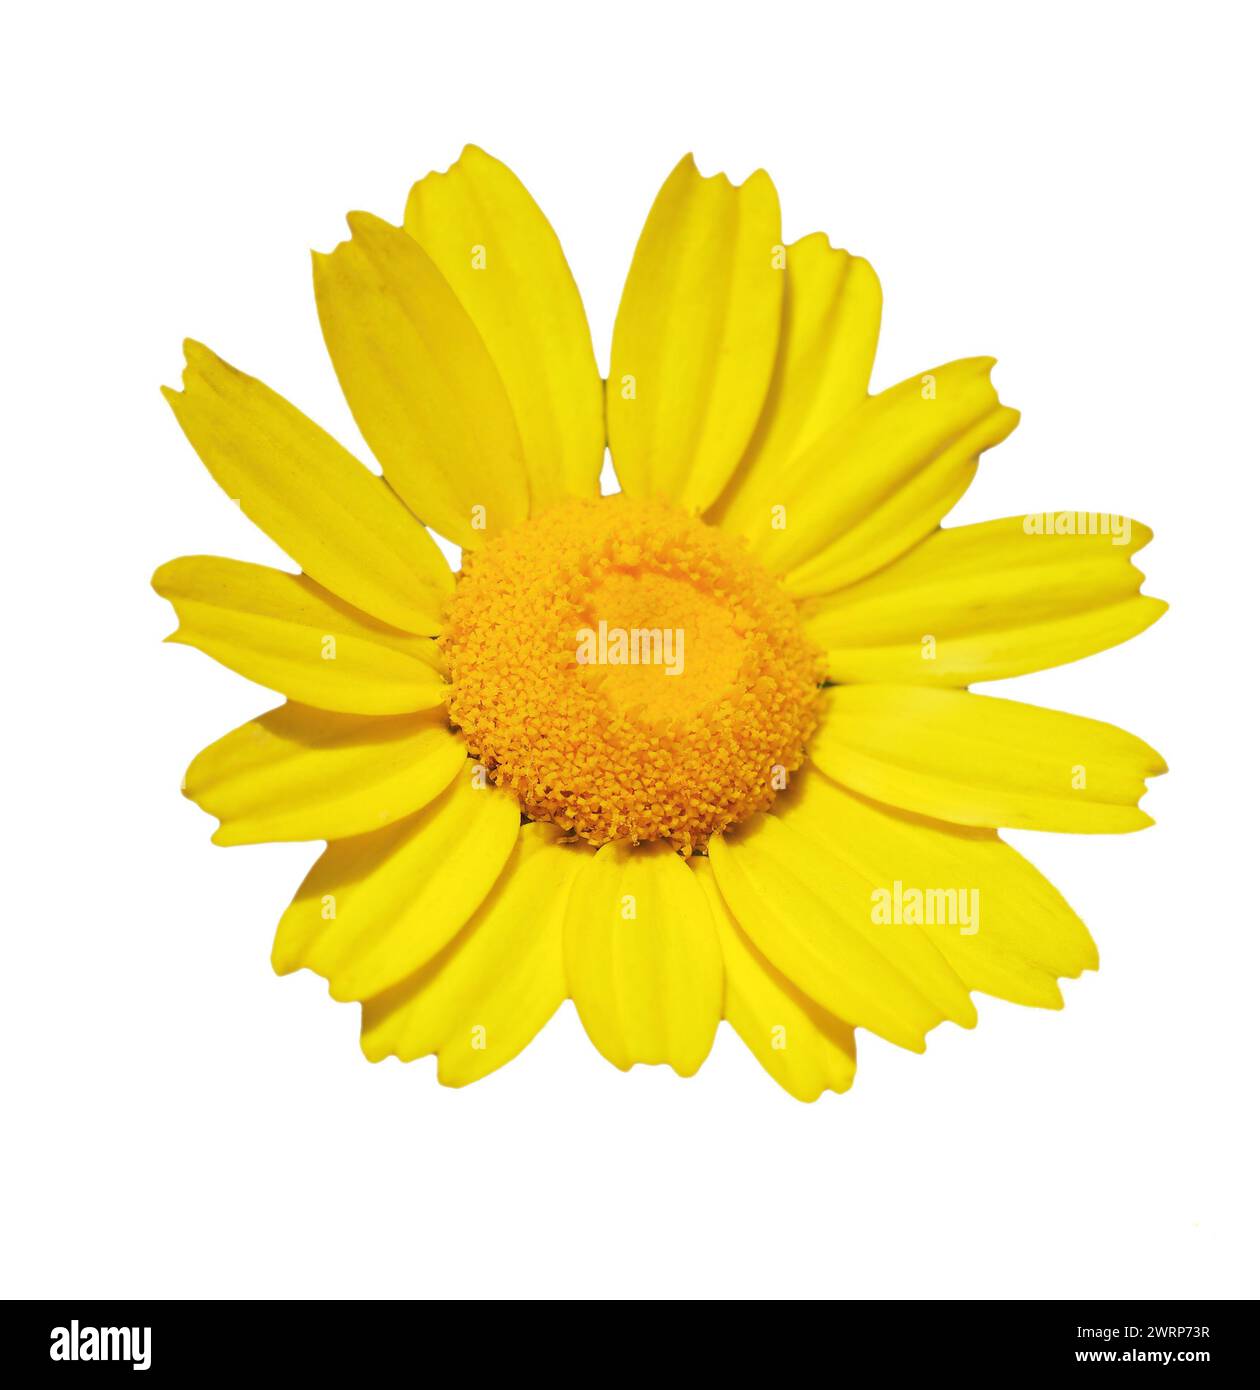 Spring flower, a solitary yellow daisy - Glebionis coronaria or Corn Marigold - Coleostephus myconis isolated on a white background. Selective focus Stock Photo